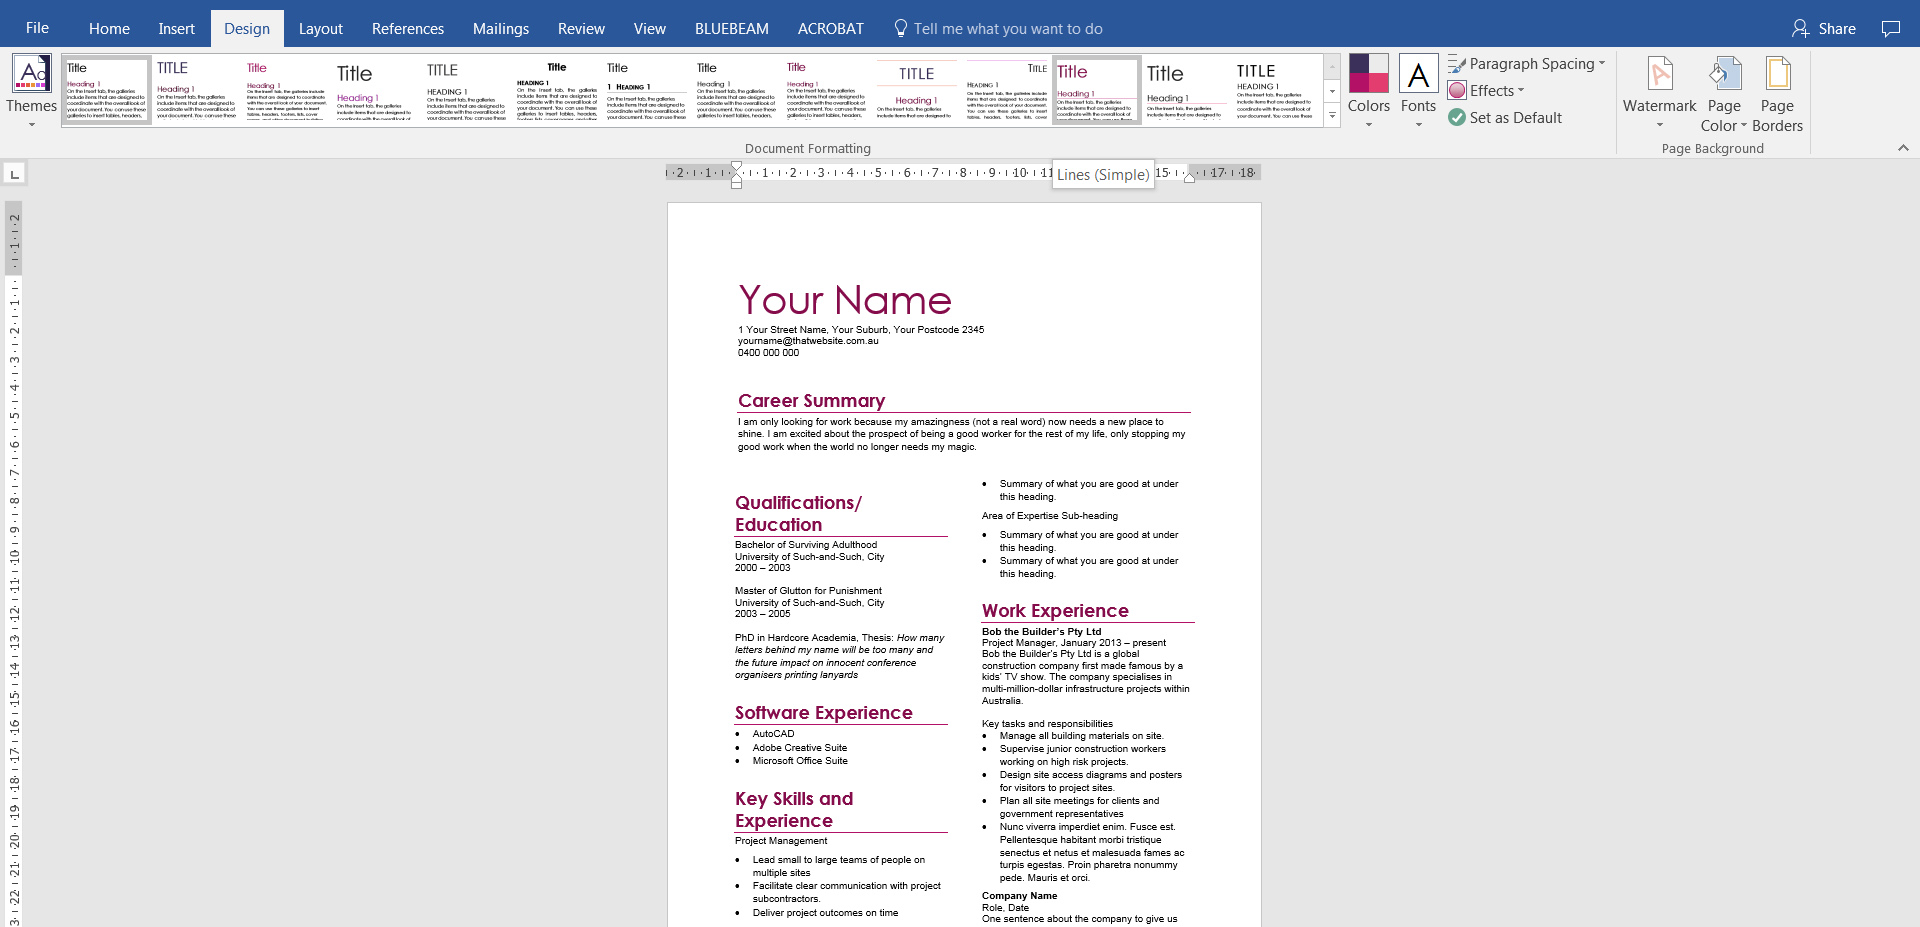 3. Design and document formatting options Word